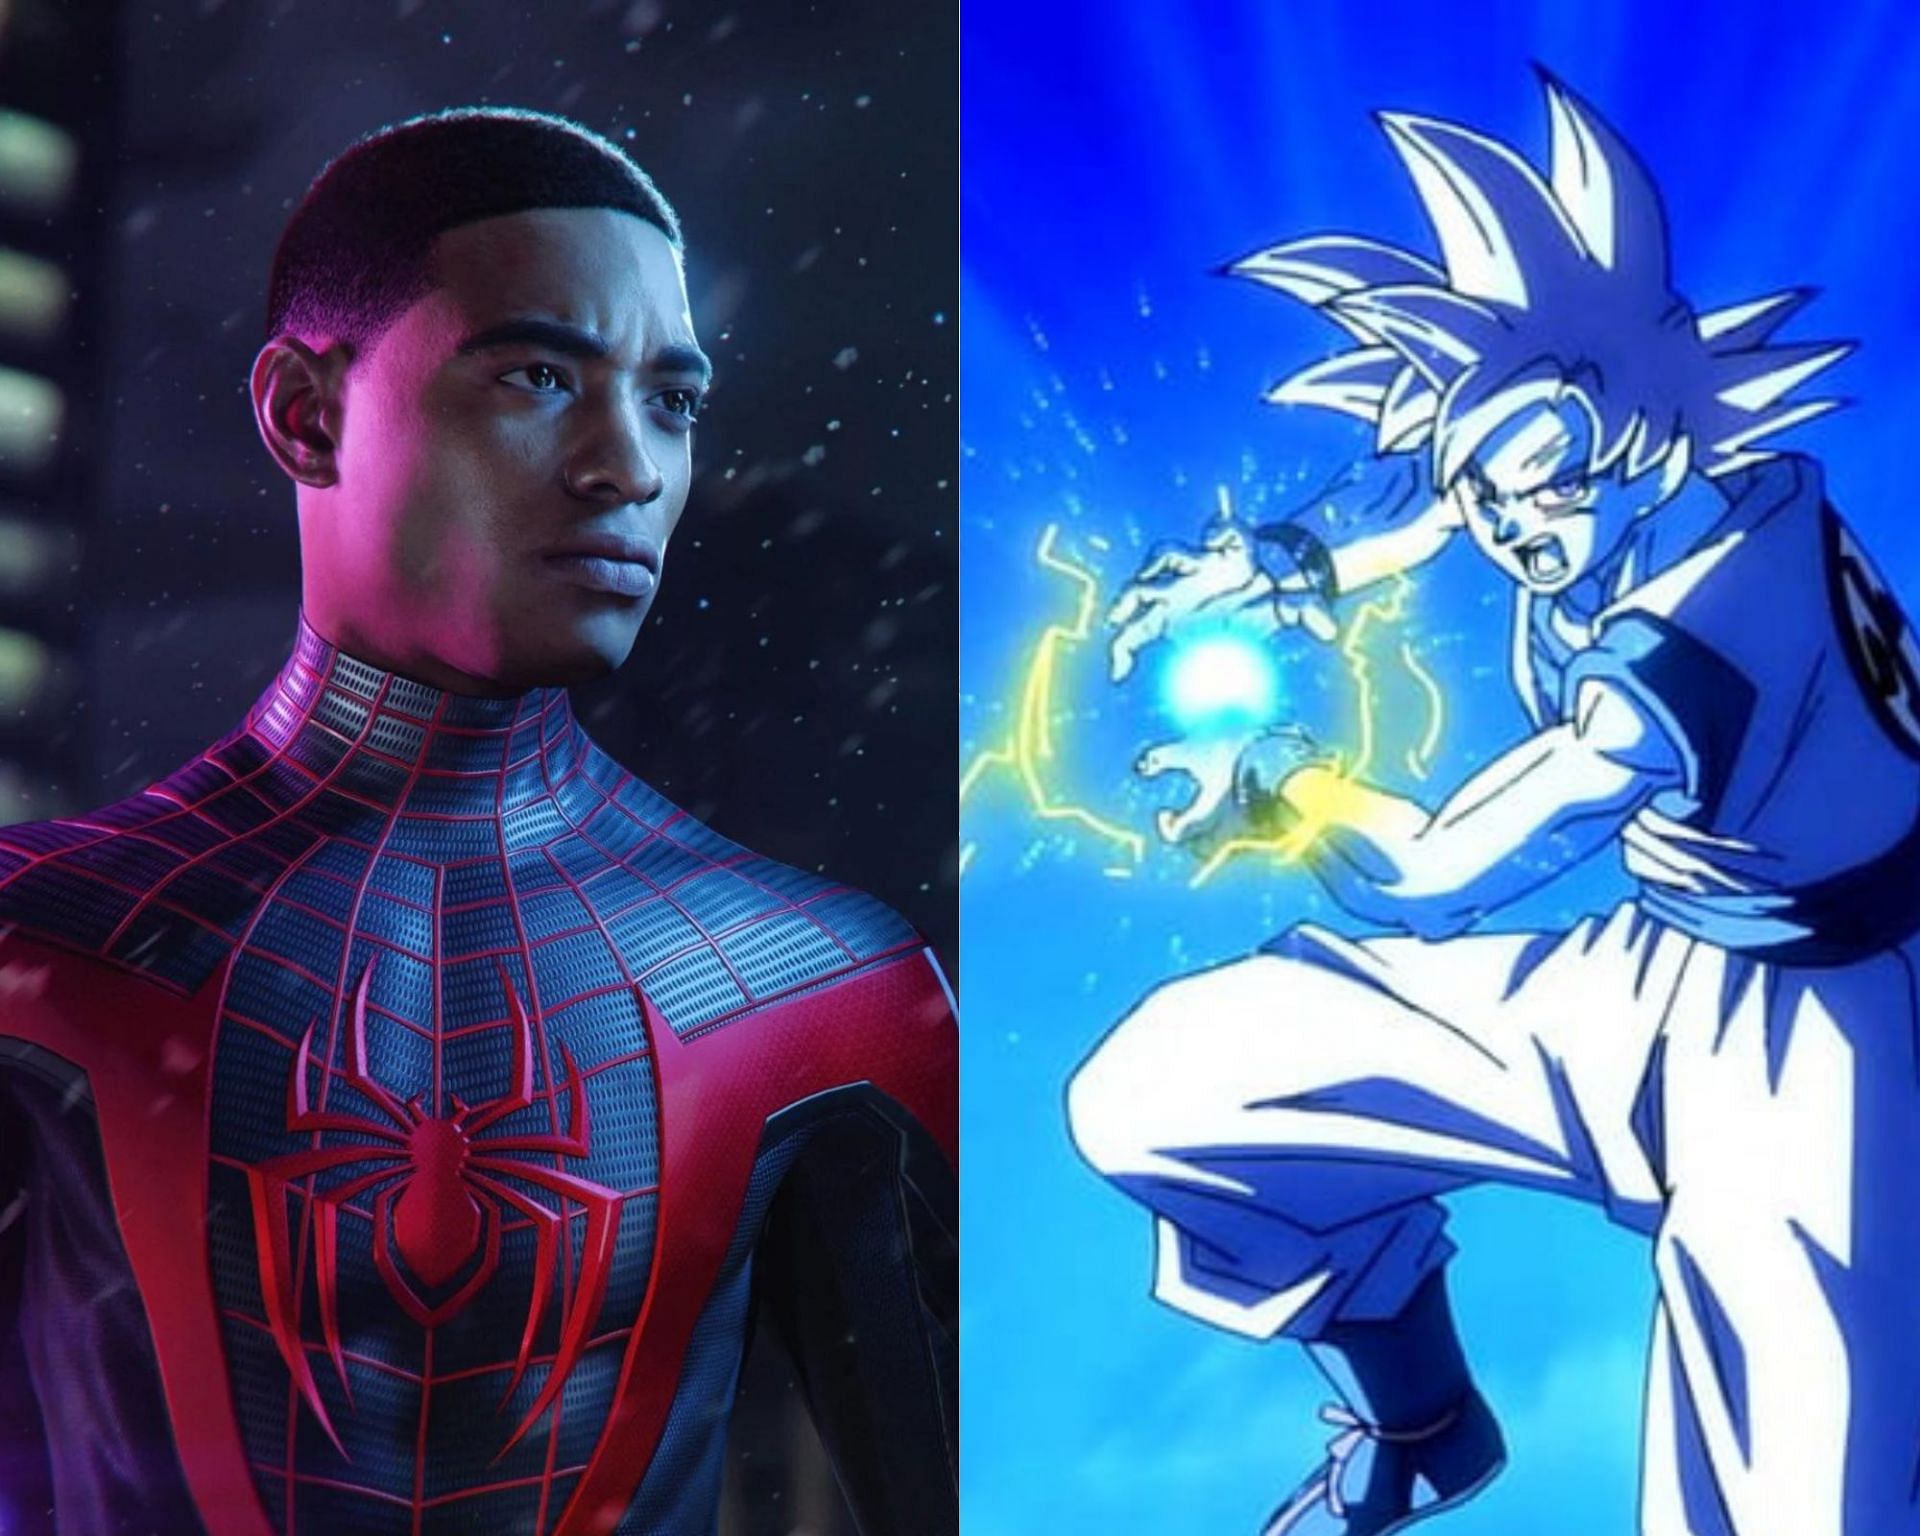 Spider-Man 2 has Dragon Ball fans psyched with Miles